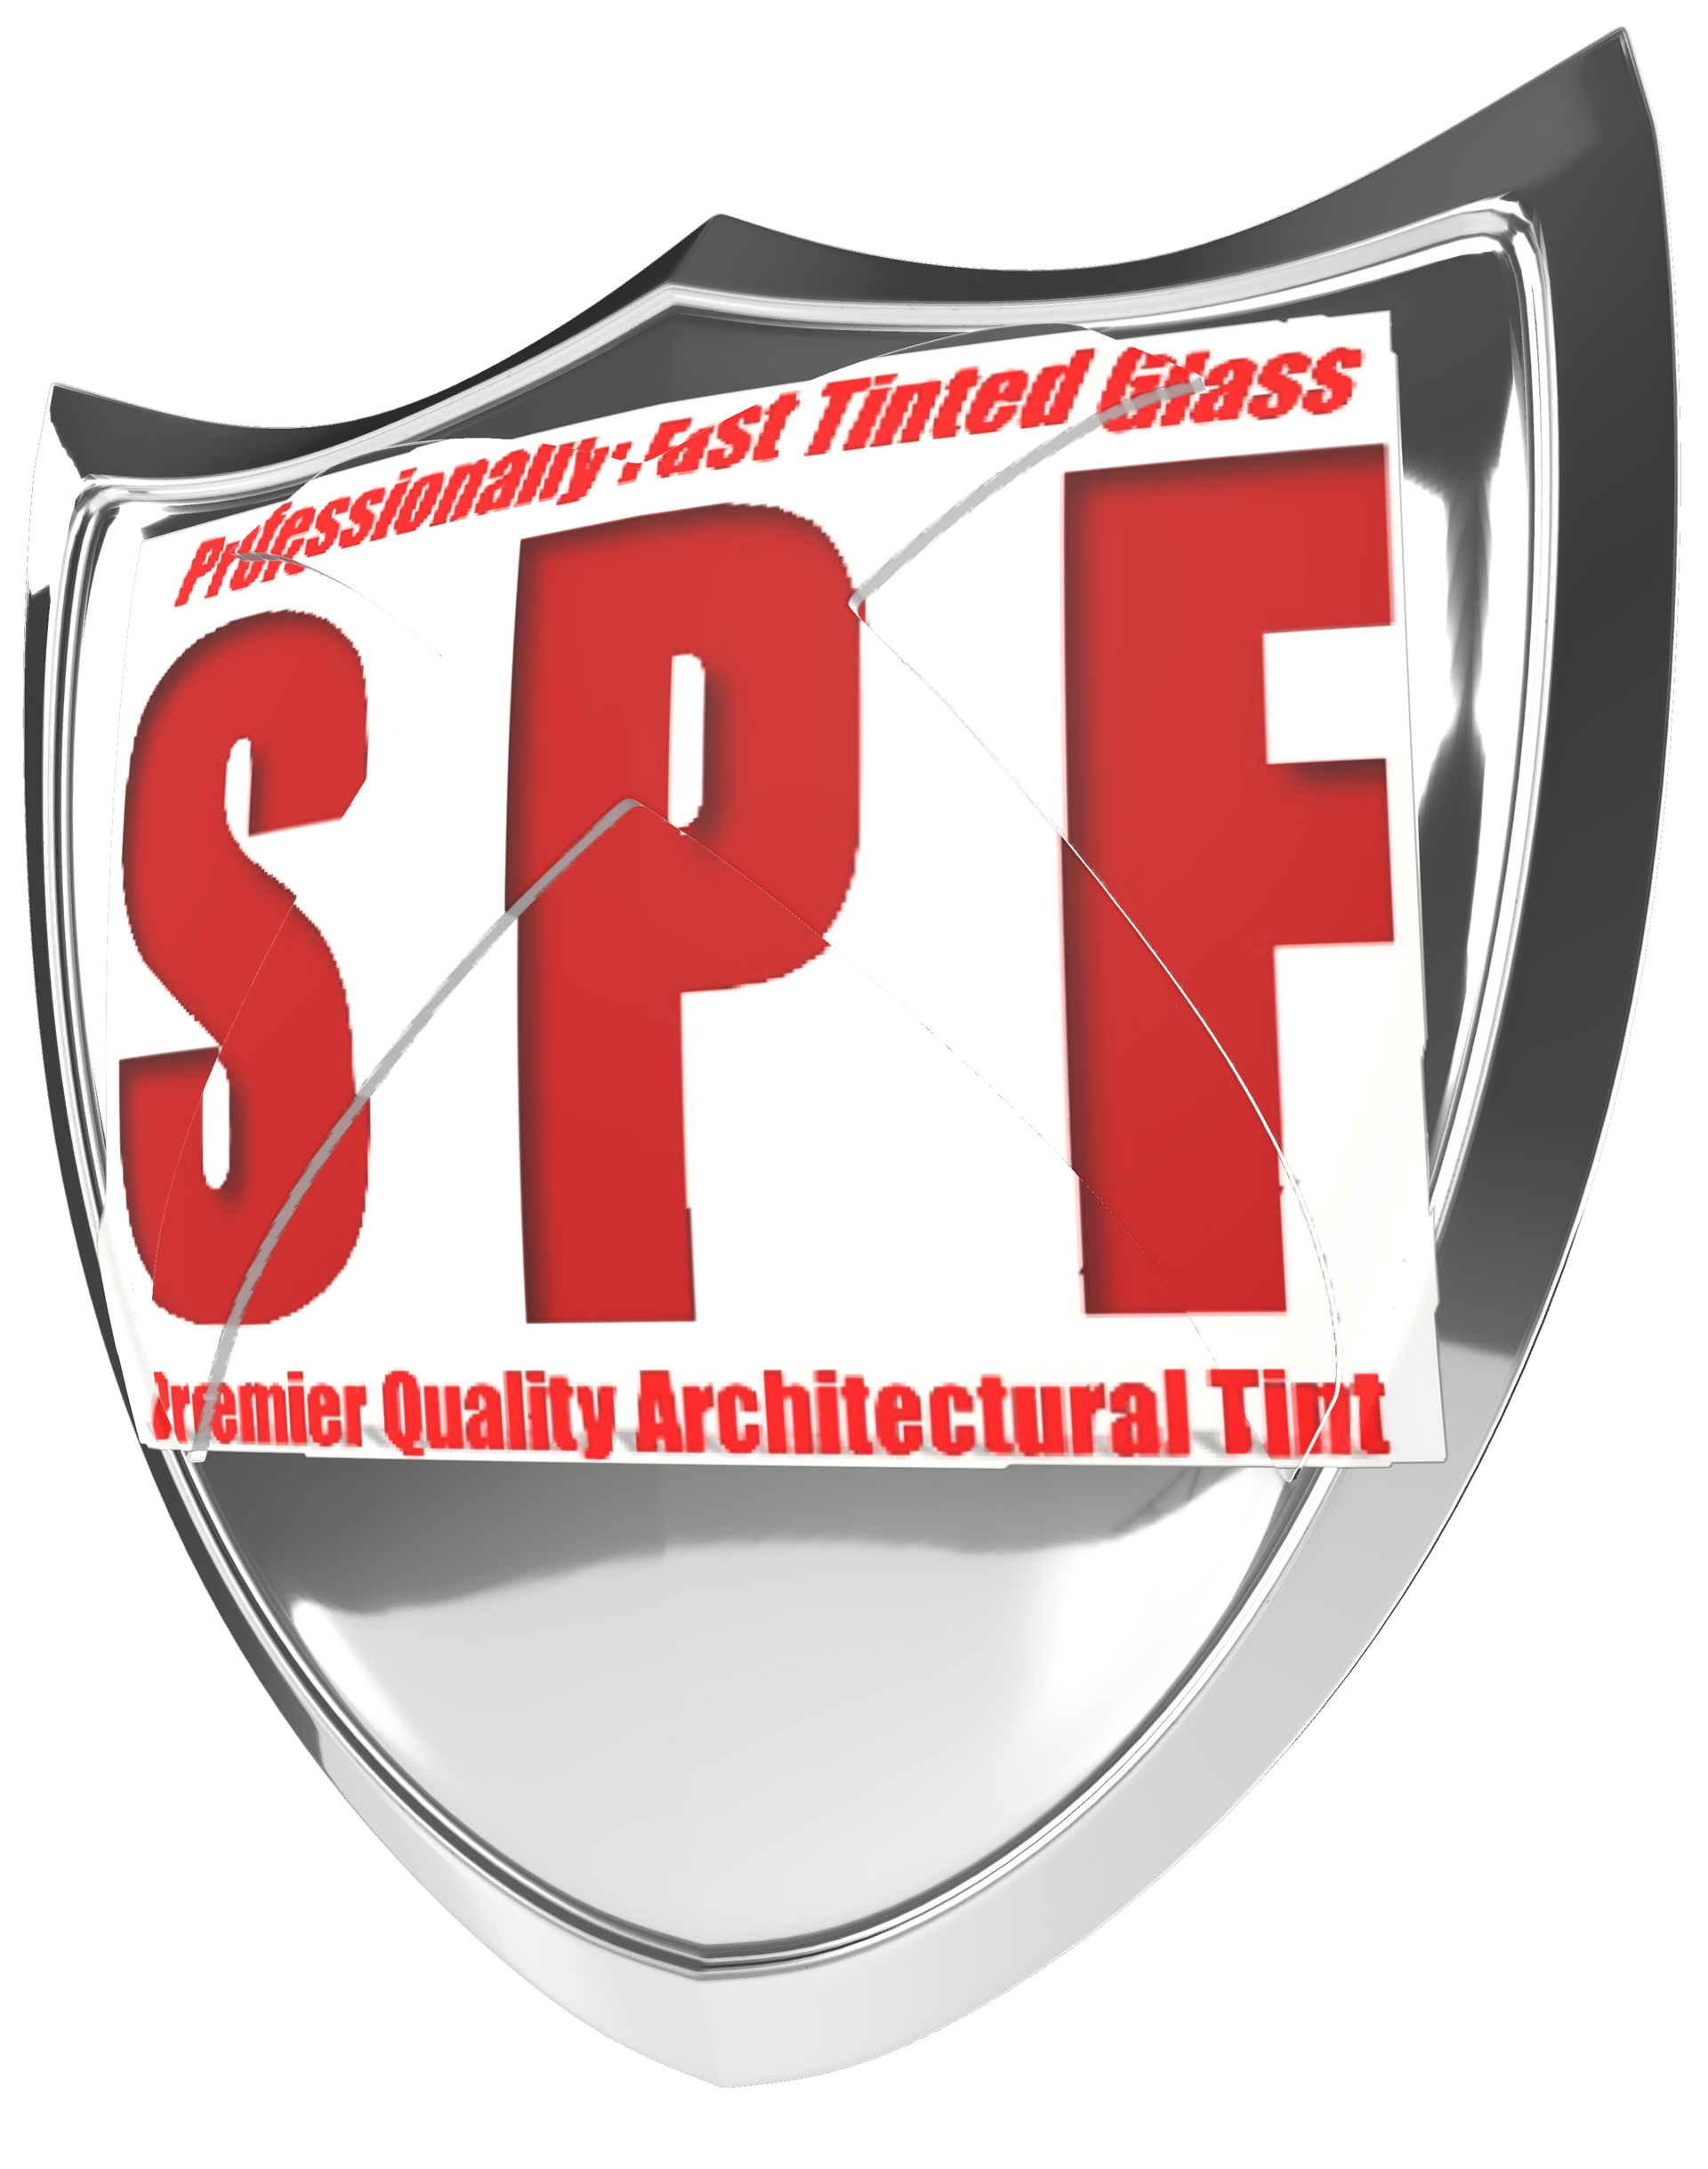 SPF Tinting Products & Services Seal of Authenticity. Nationally Recognized Industry-Leading Performance Tint. Proudly built here locally in Alabama - SPF residential tinting in Wetumpka